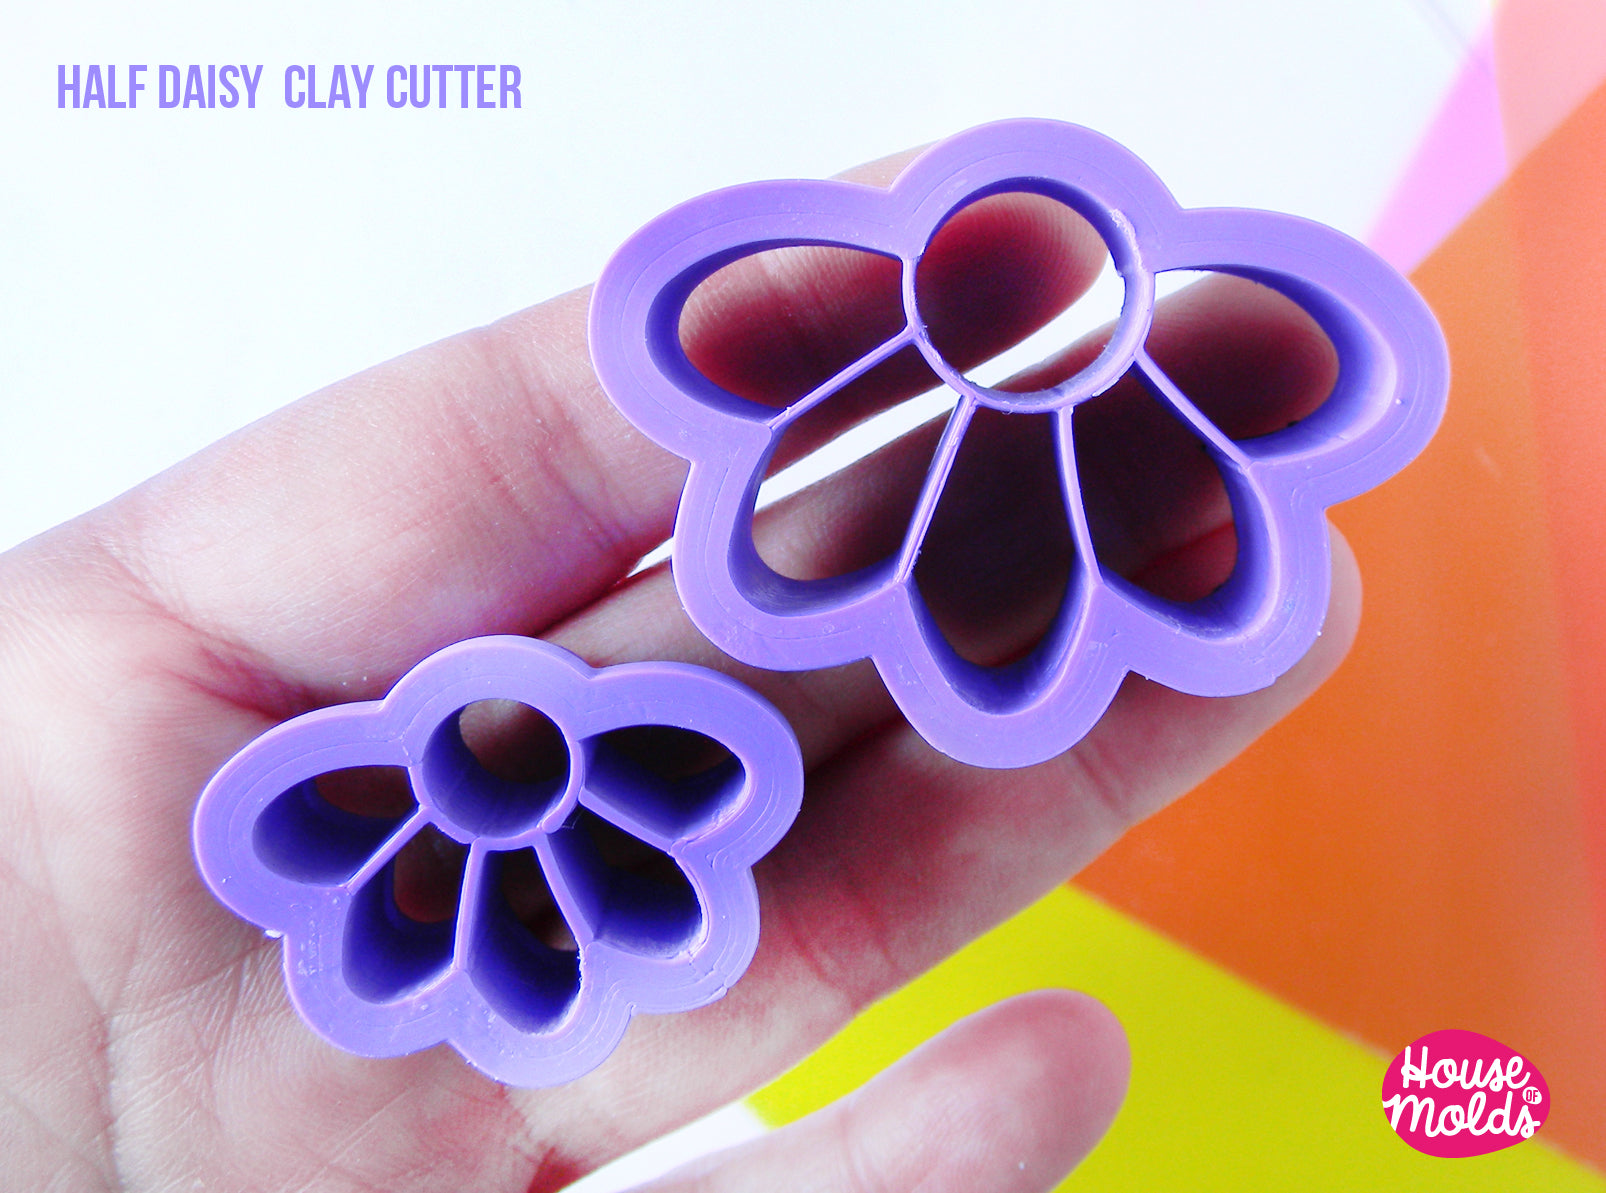 HALF DAISY CLAY CUTTER - BIOBASED PLA - CLEAN CUT EDGES – House Of Molds